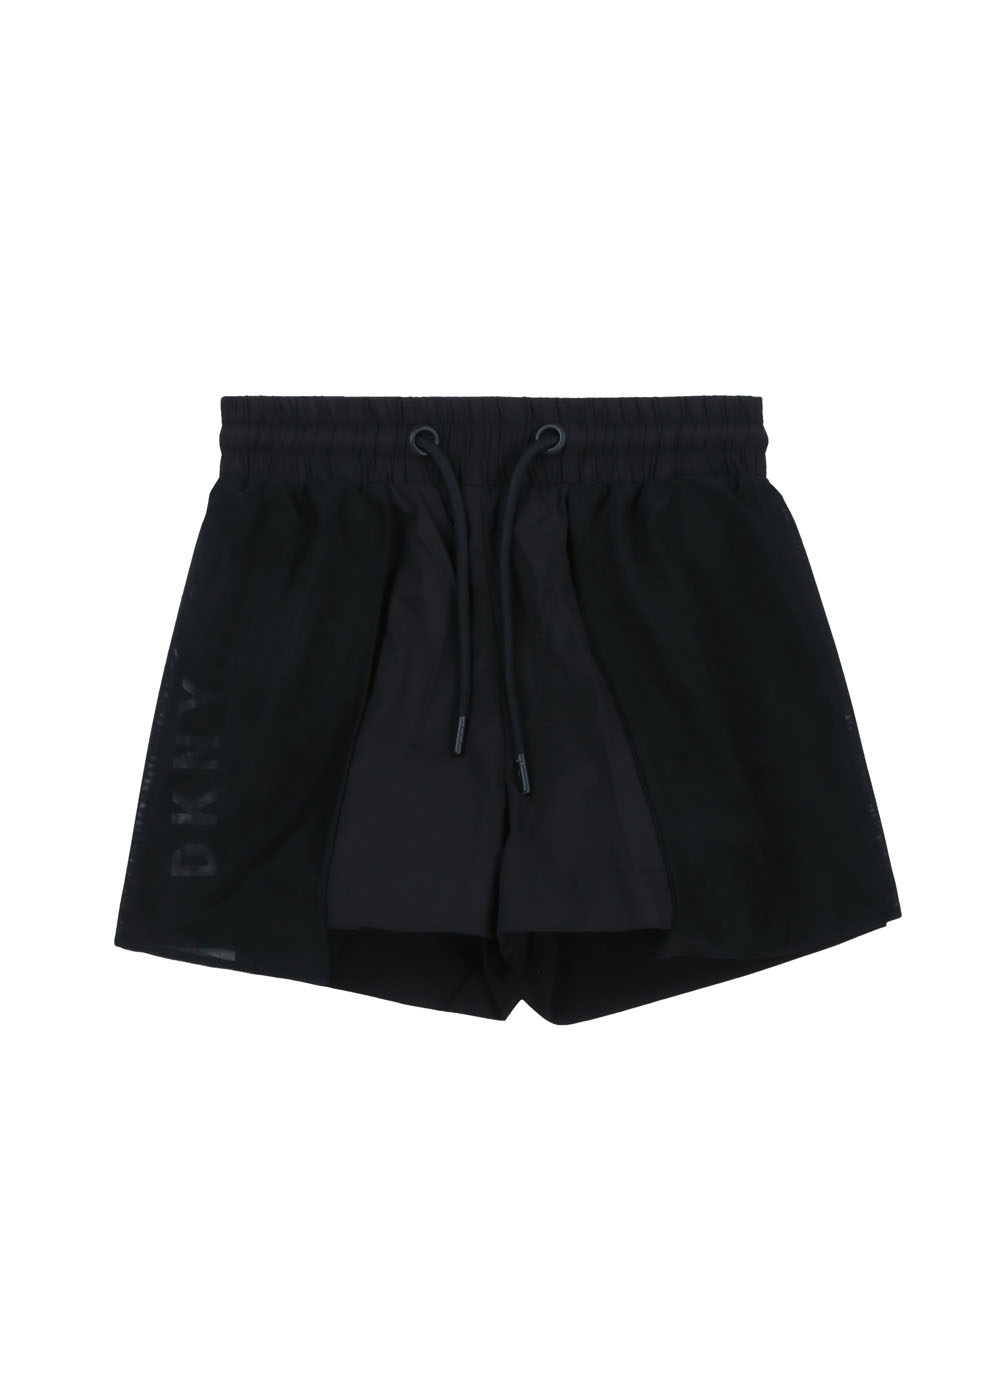 Featured image for “DKNY SHORTS IN MESH”